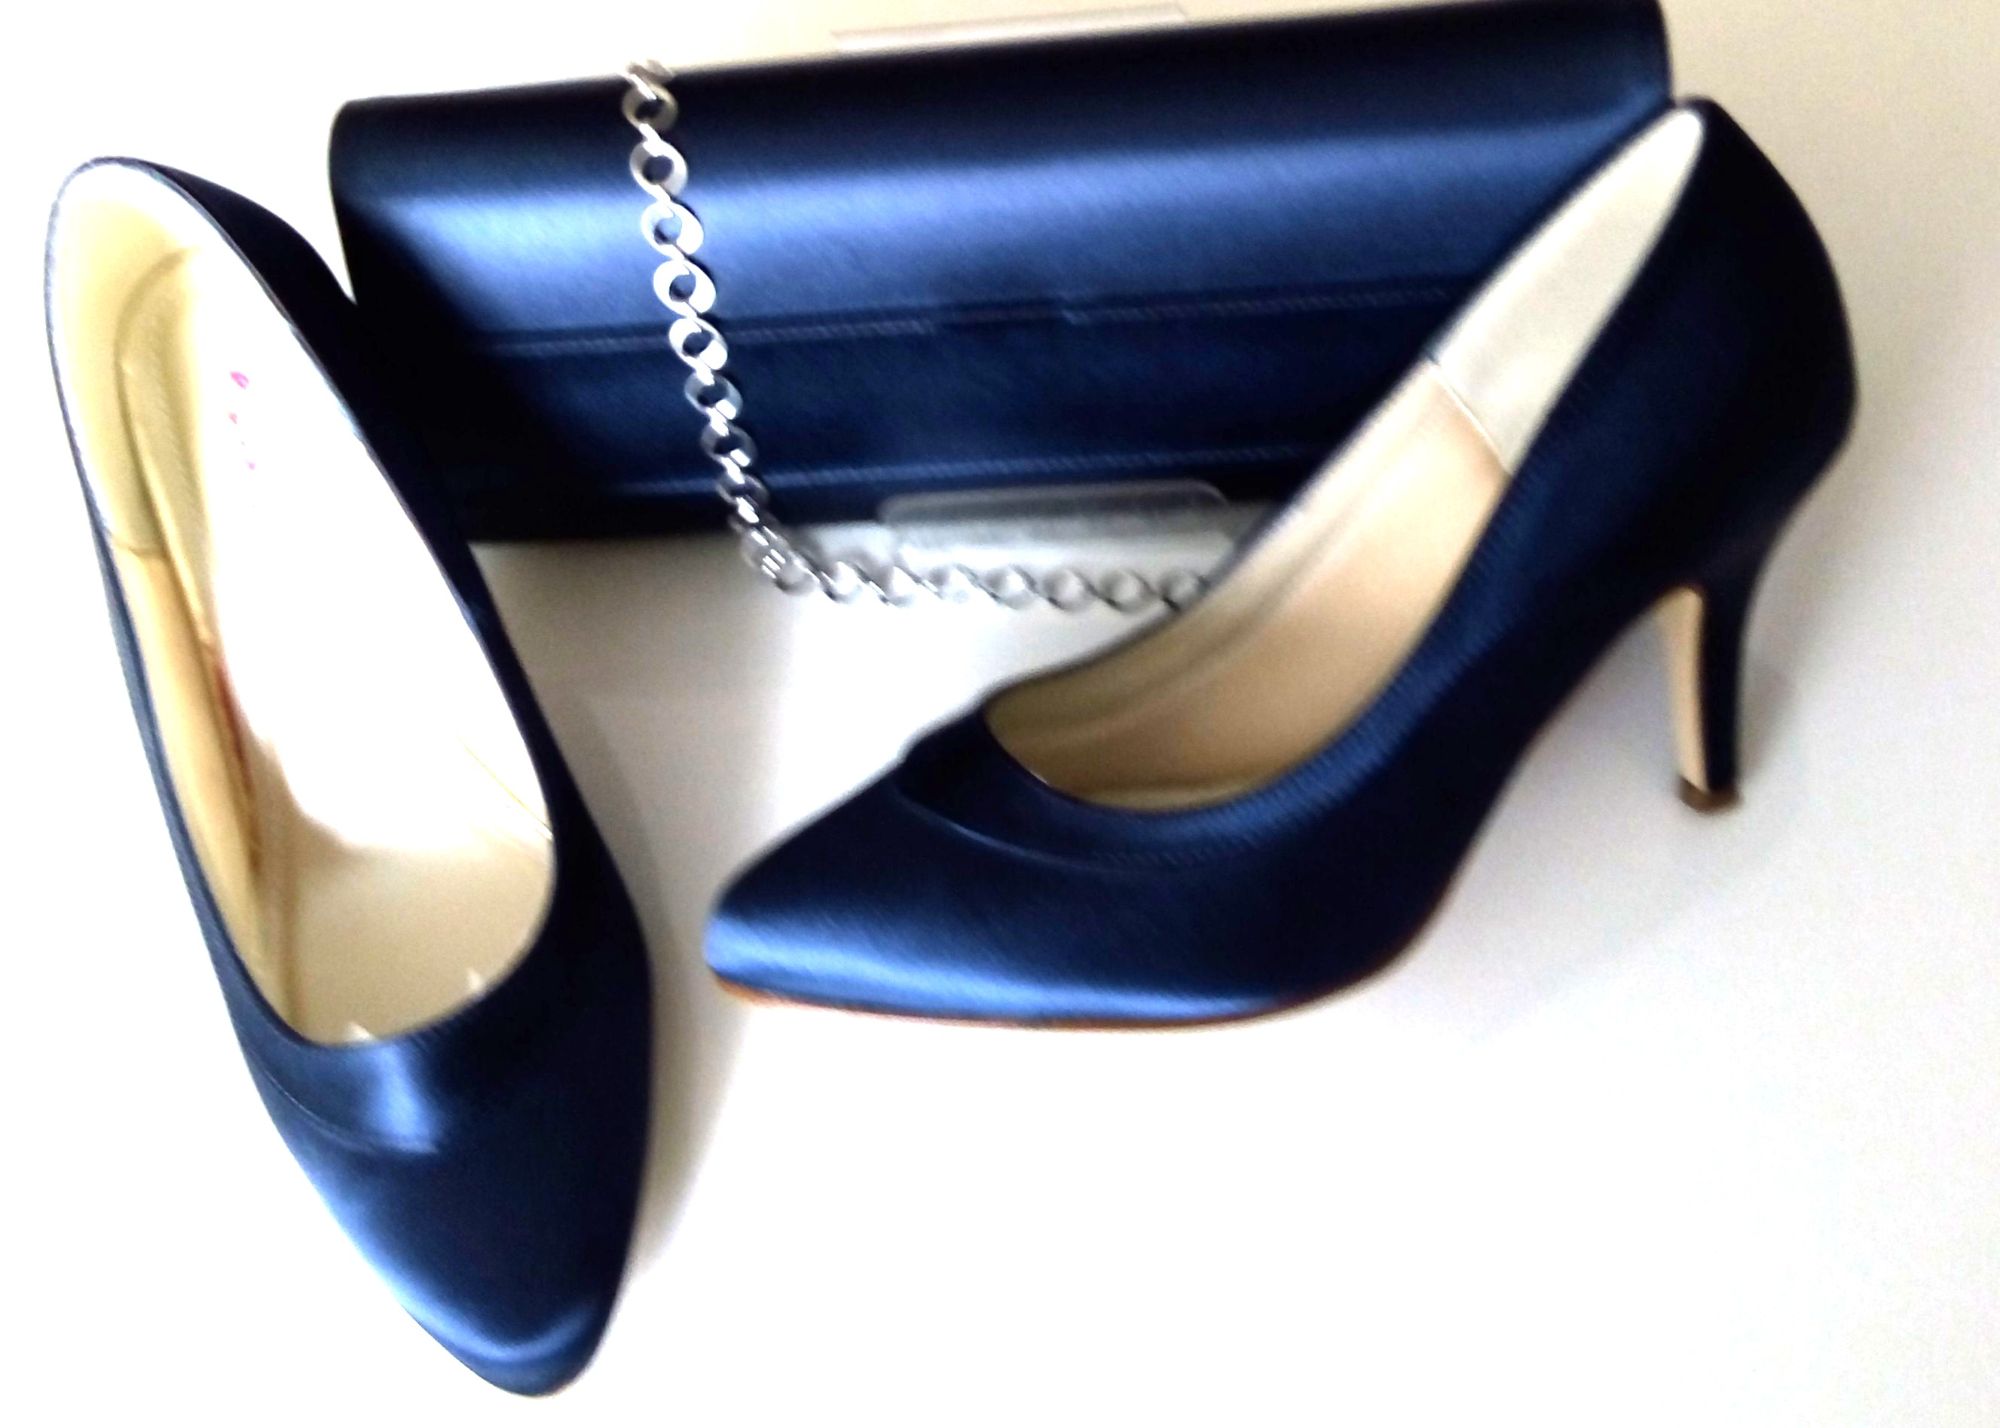 navy shoes and matching clutch bag